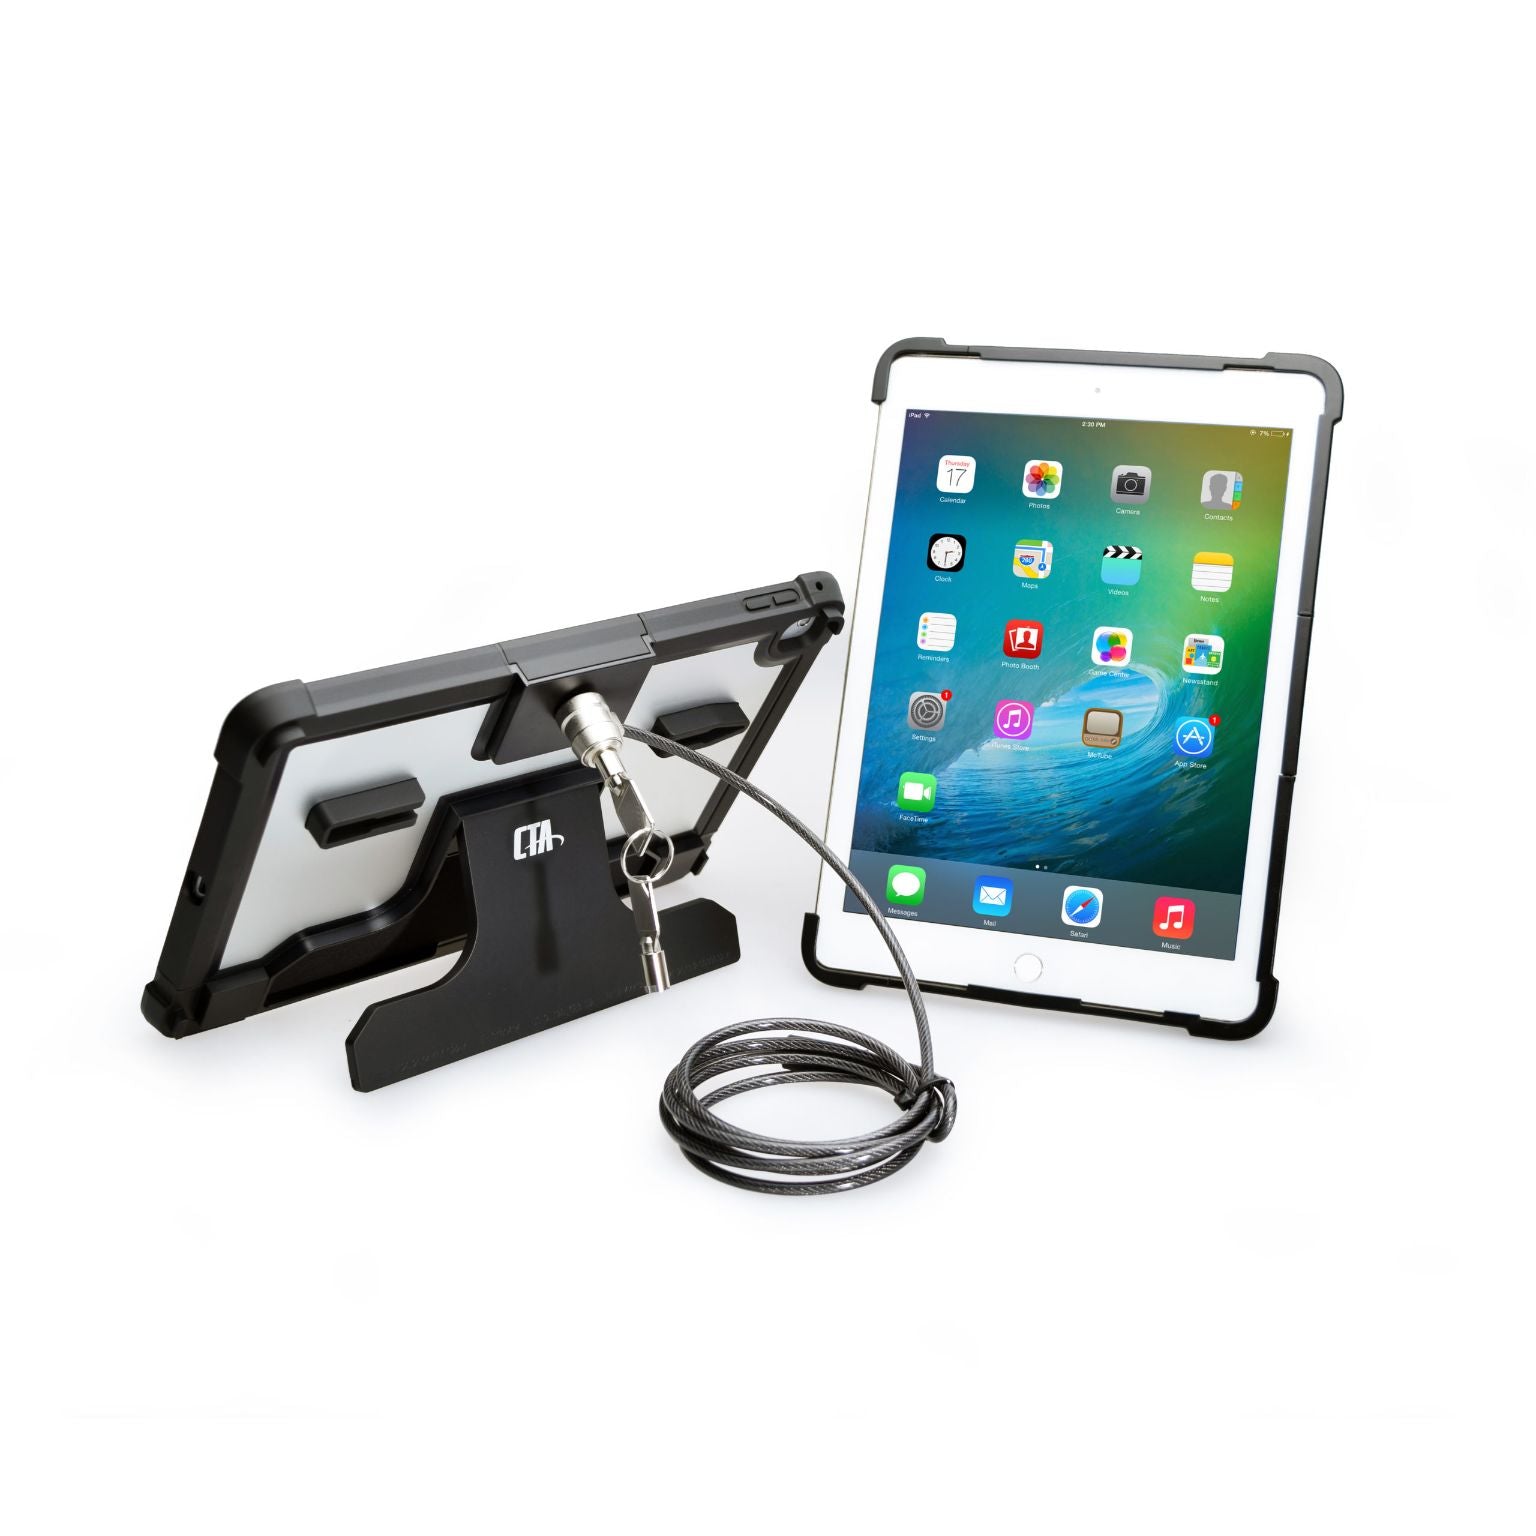 Security Carrying Case with Kickstand and Anti-Theft Cable for iPad Pro 9.7 inch and iPad Air 2